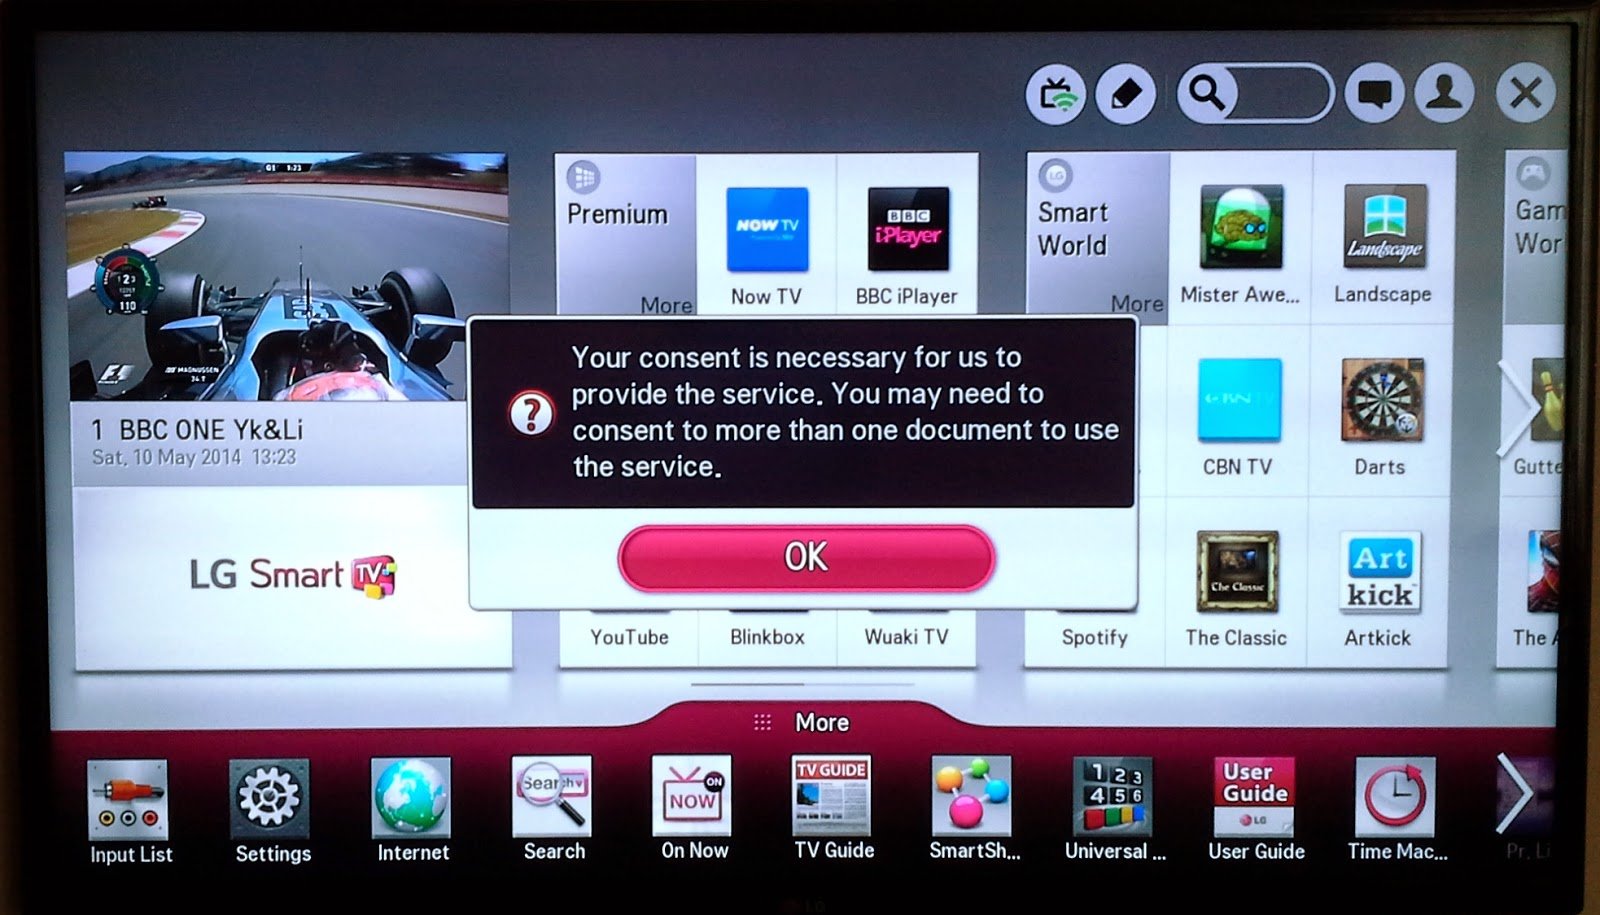 Bad Actor: With Update, LG Says No Monitoring, No Smart TV!